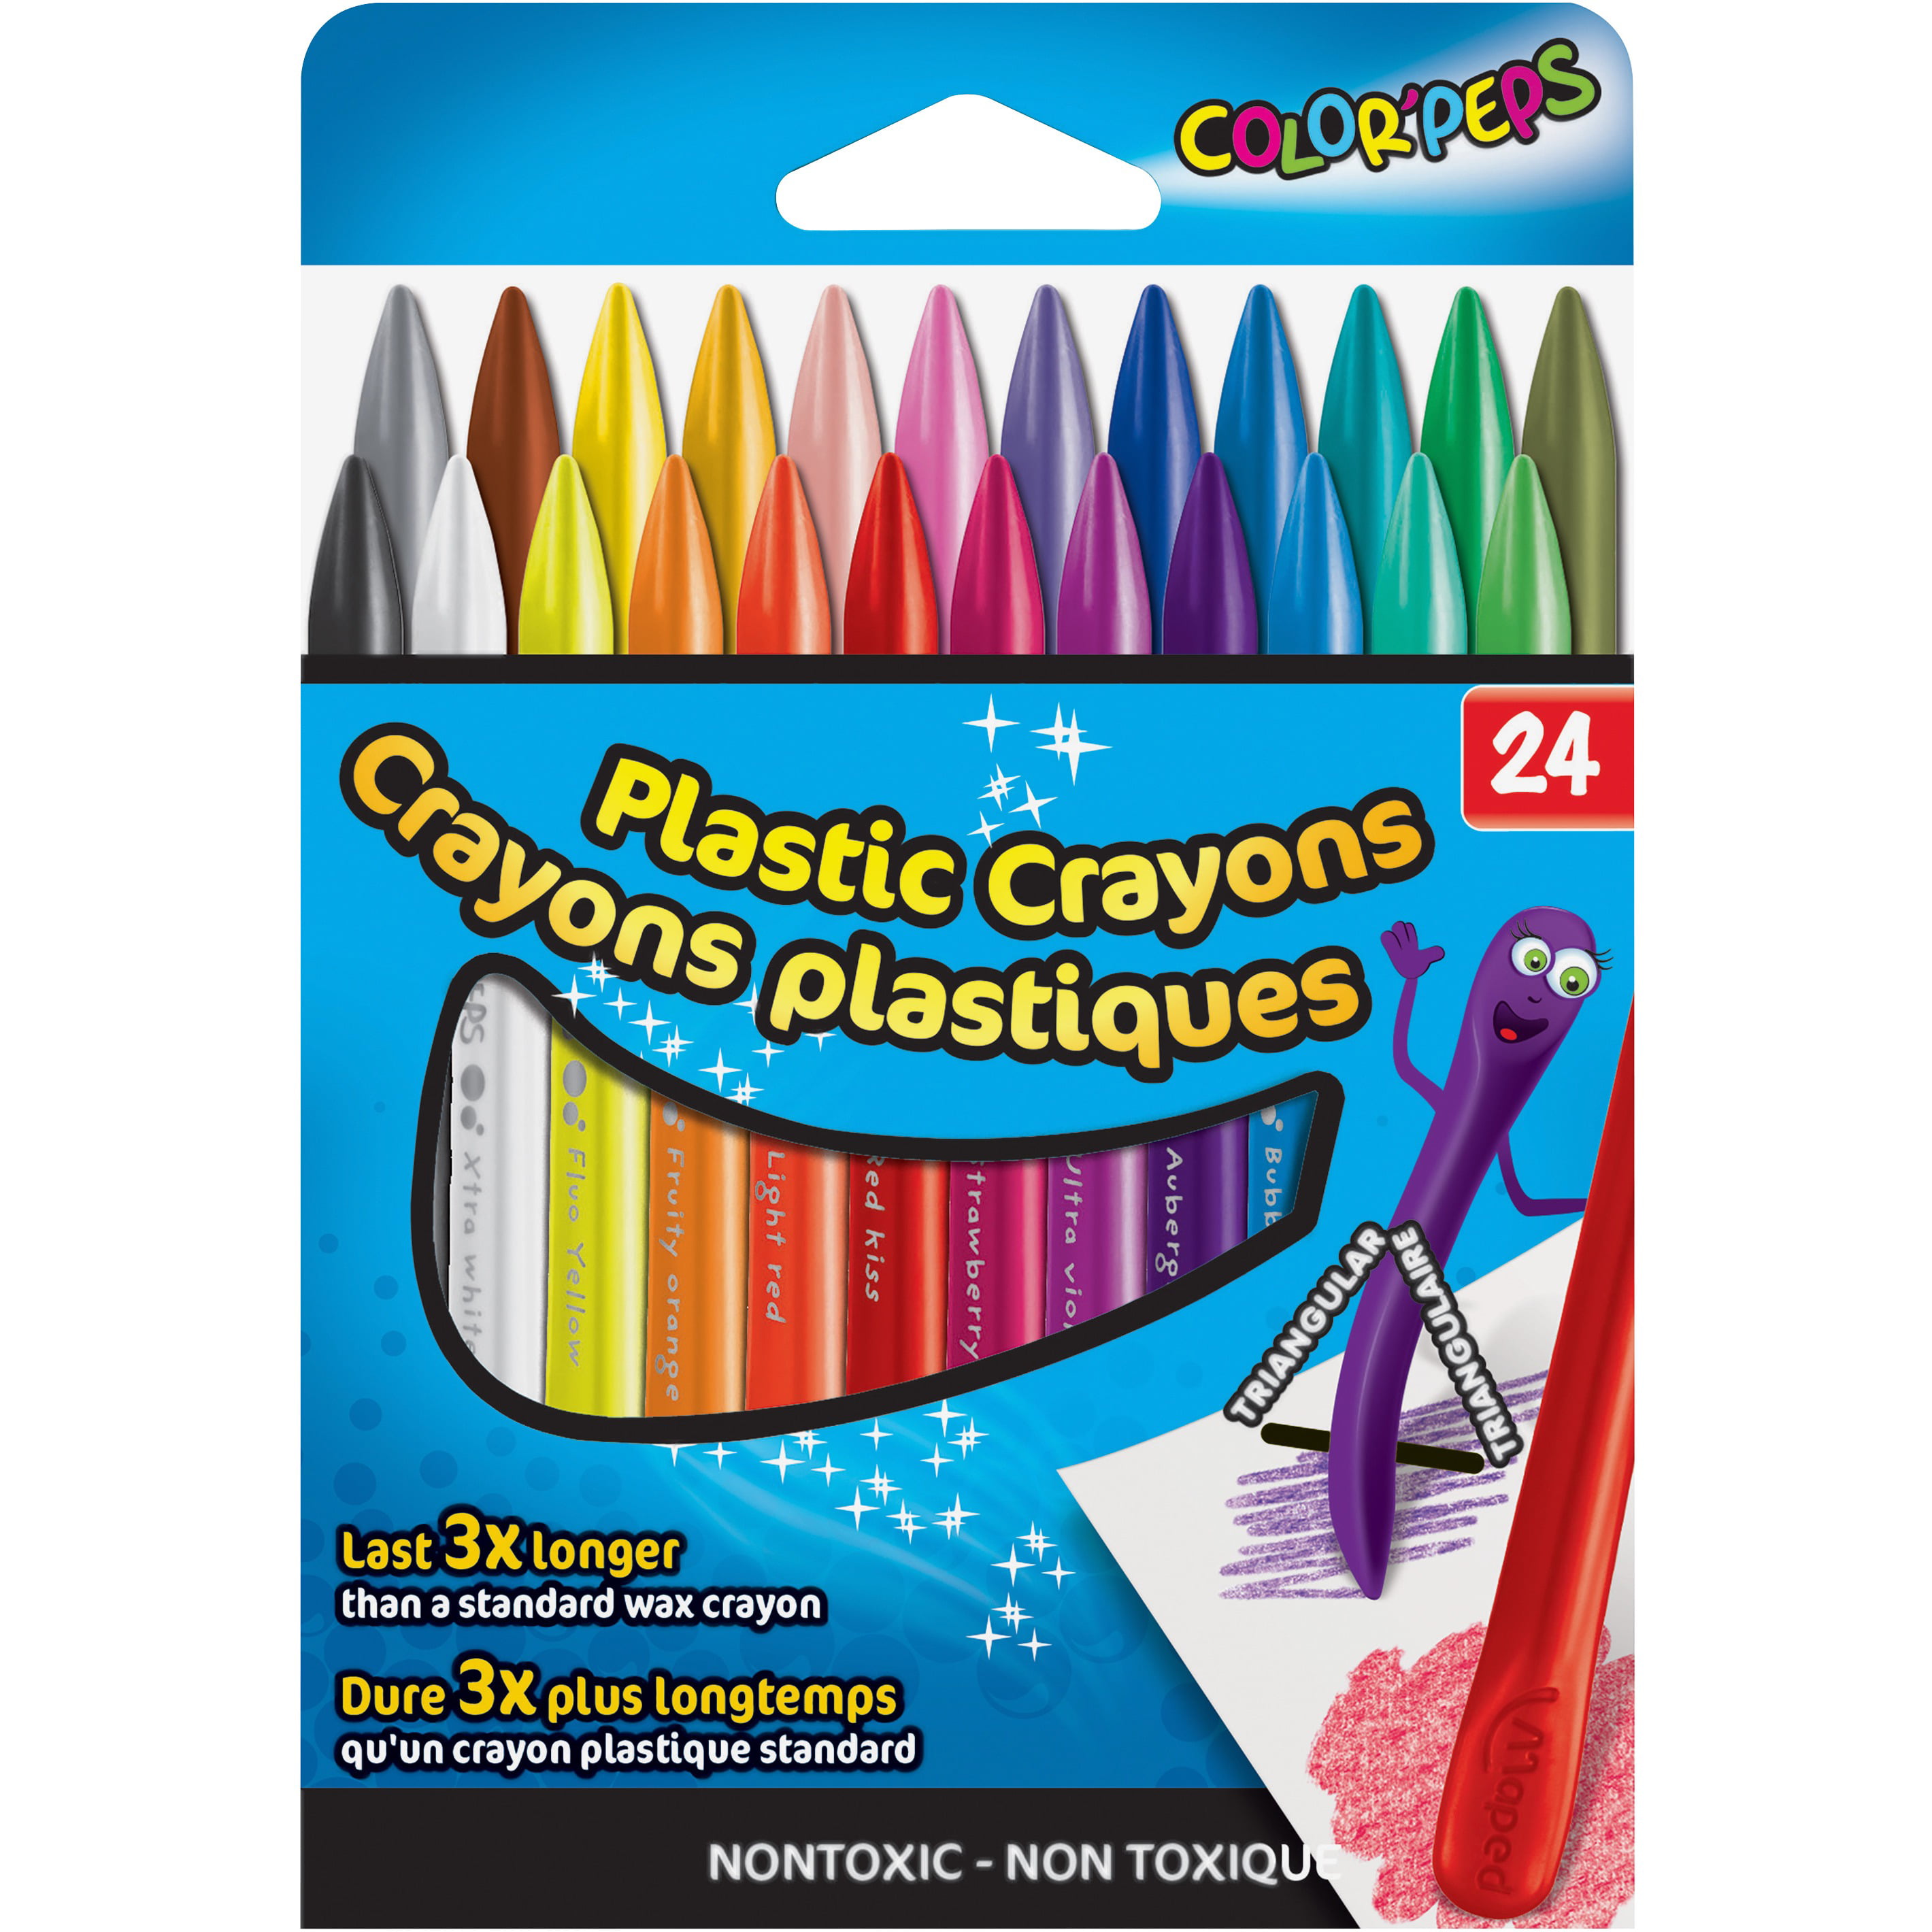 Mixable Color Crayons: Smooth, Dual-Color Pastels for Children – CHL-STORE